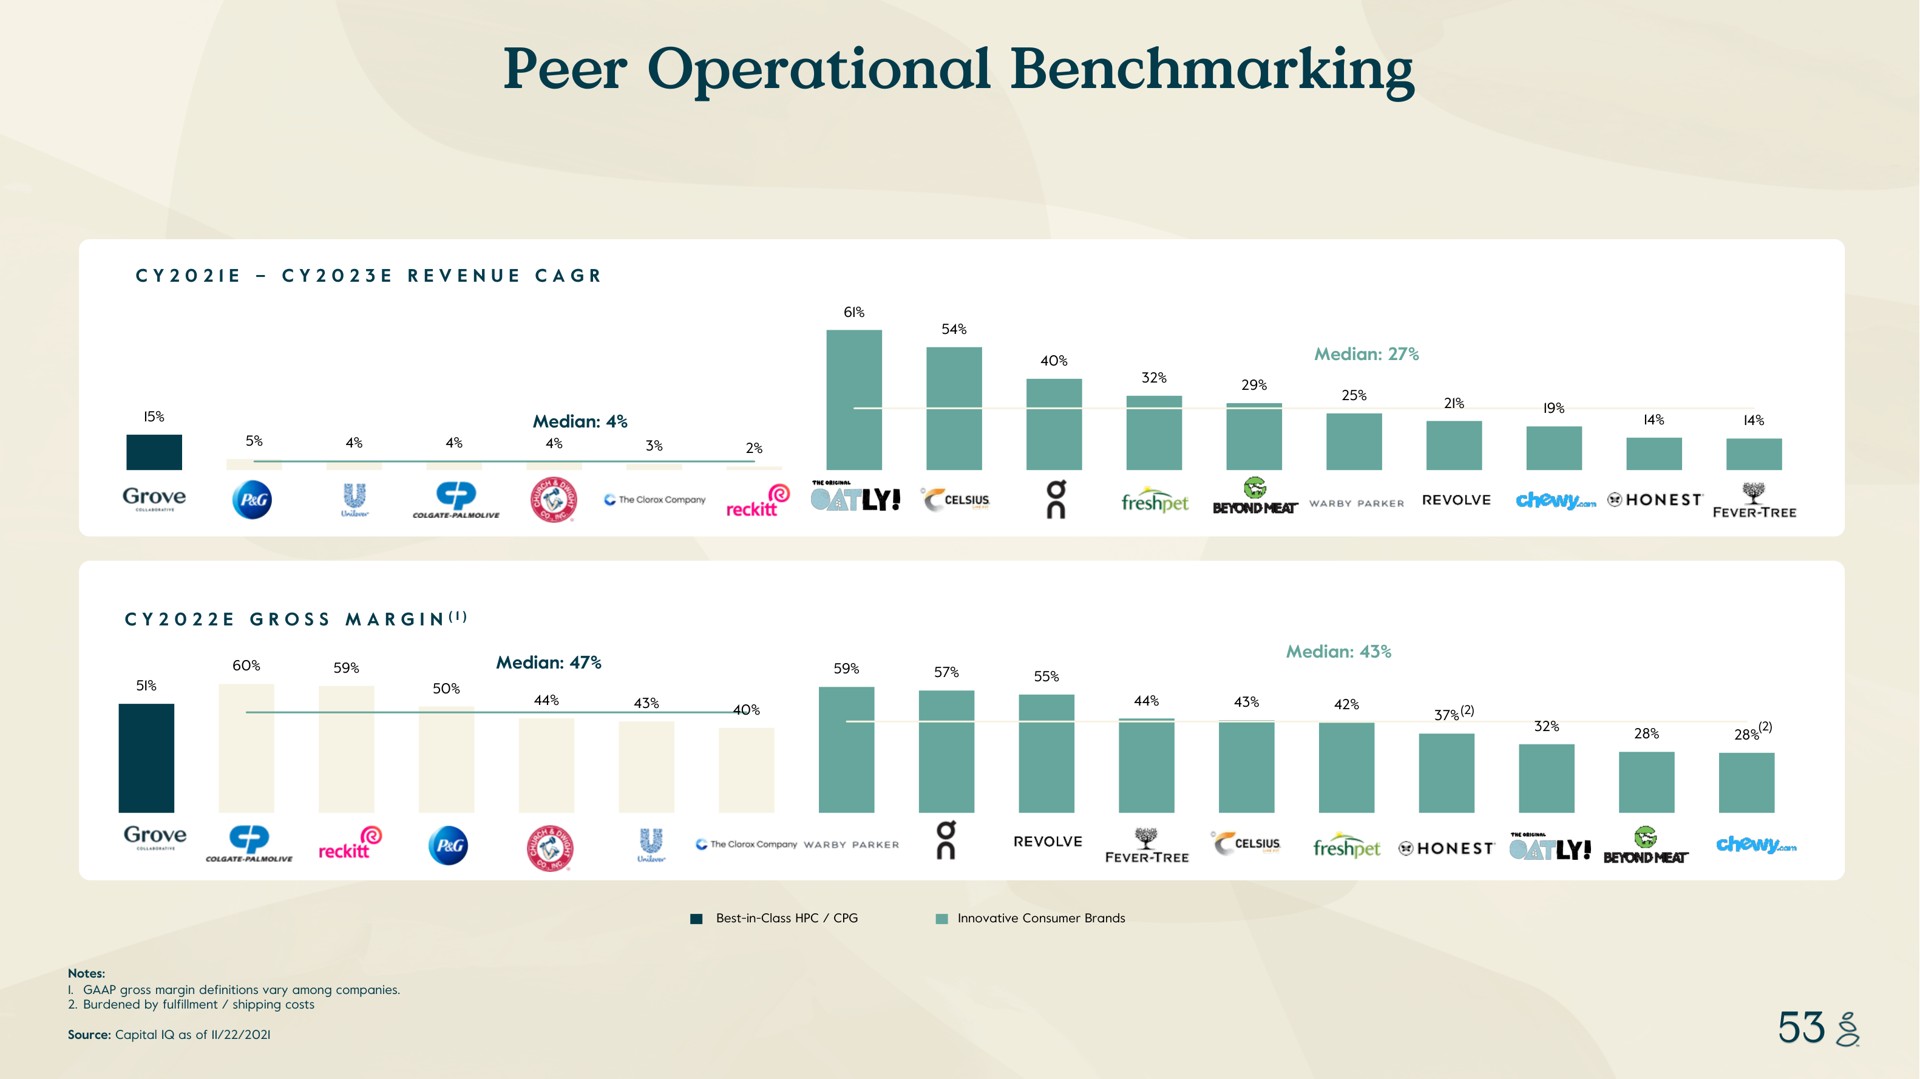 peer operational revenue a median a median fee the company parker revolve honest mat tree gross margin median median grove the company parker revolve honest are chewy i i notes gross margin definitions vary among companies burdened by fulfillment shipping costs source capital as of best in class innovative consumer brands | Grove